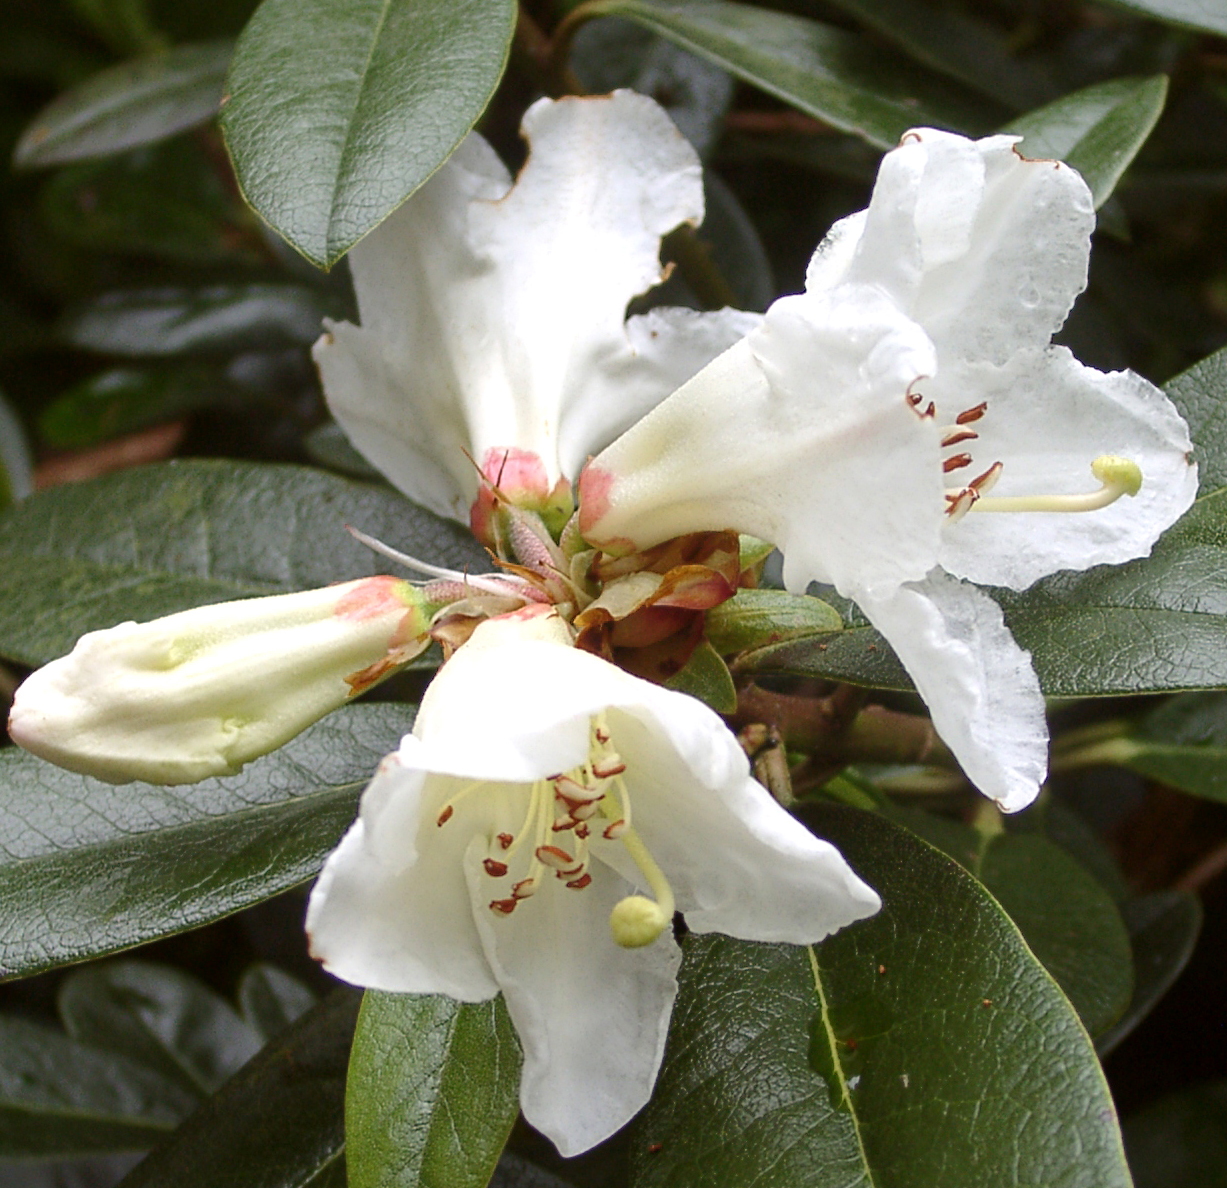 MADDENII ssp. CRASSUM KCV 102 Rhododendron Maddenia and Related Rhododendrons